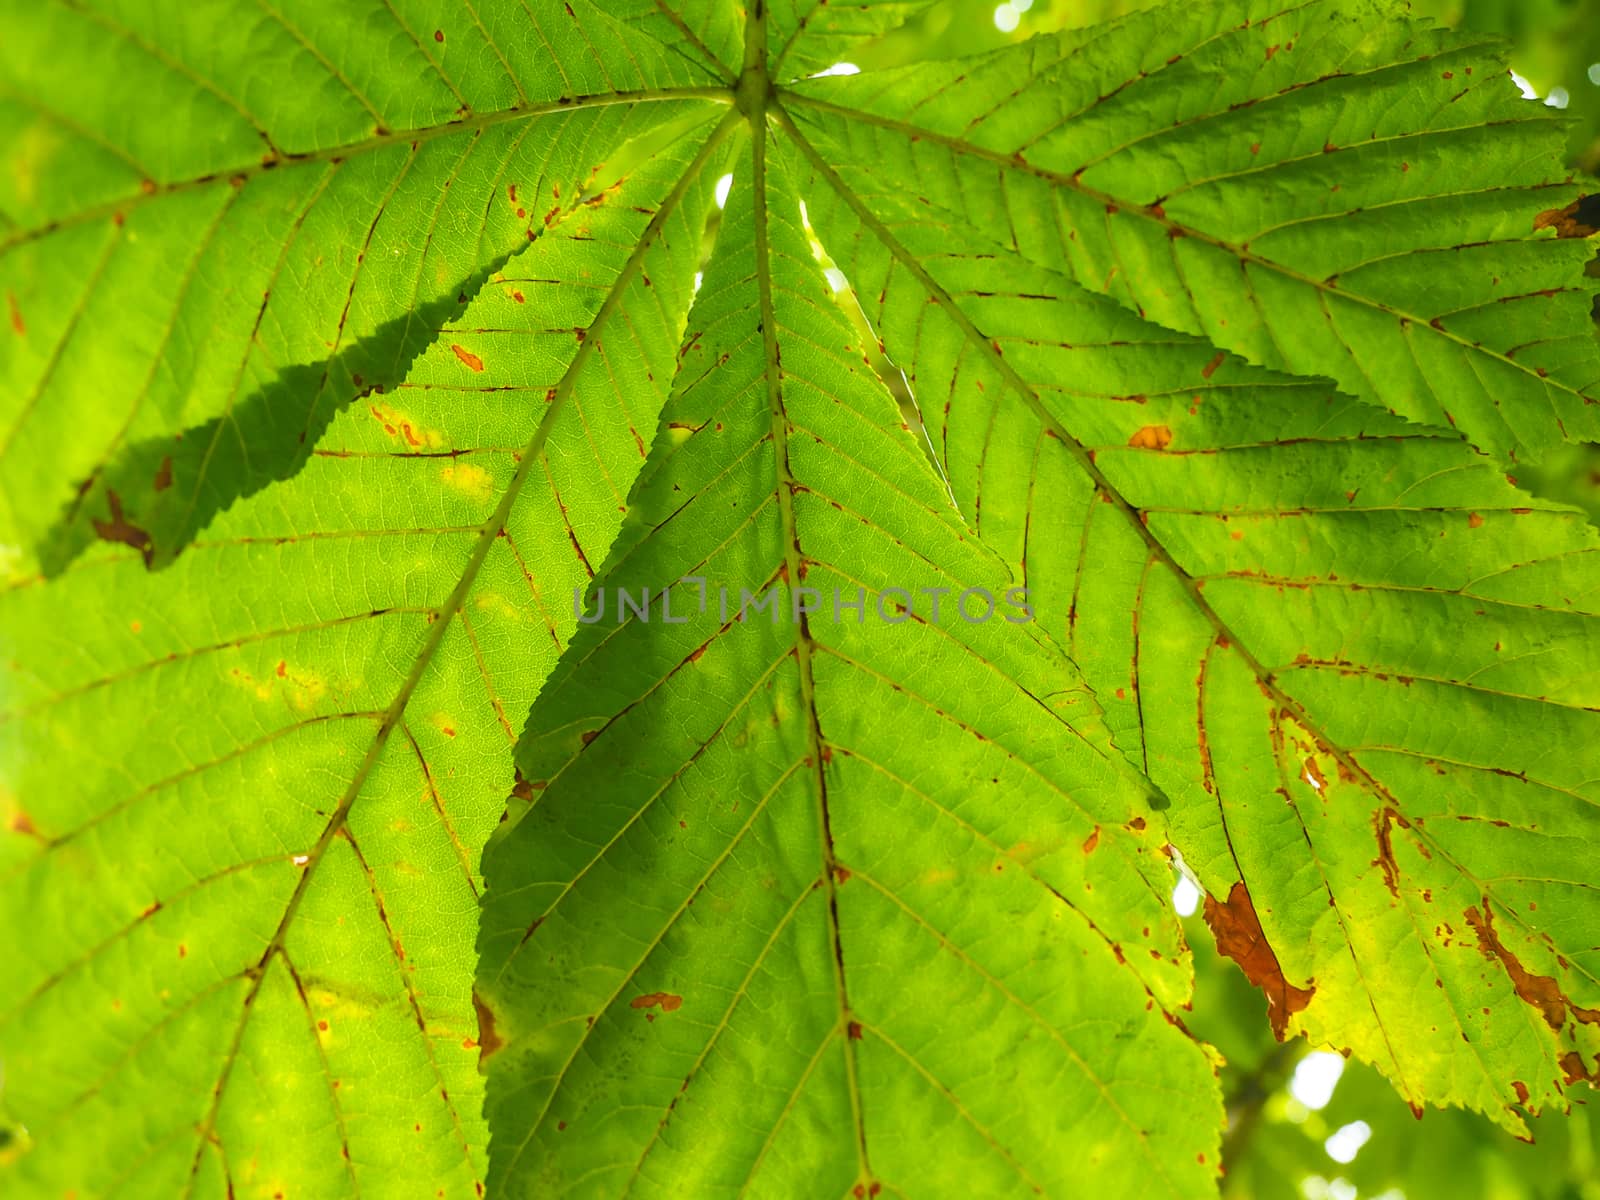 Castania leaf at closeup outdoors in daylight